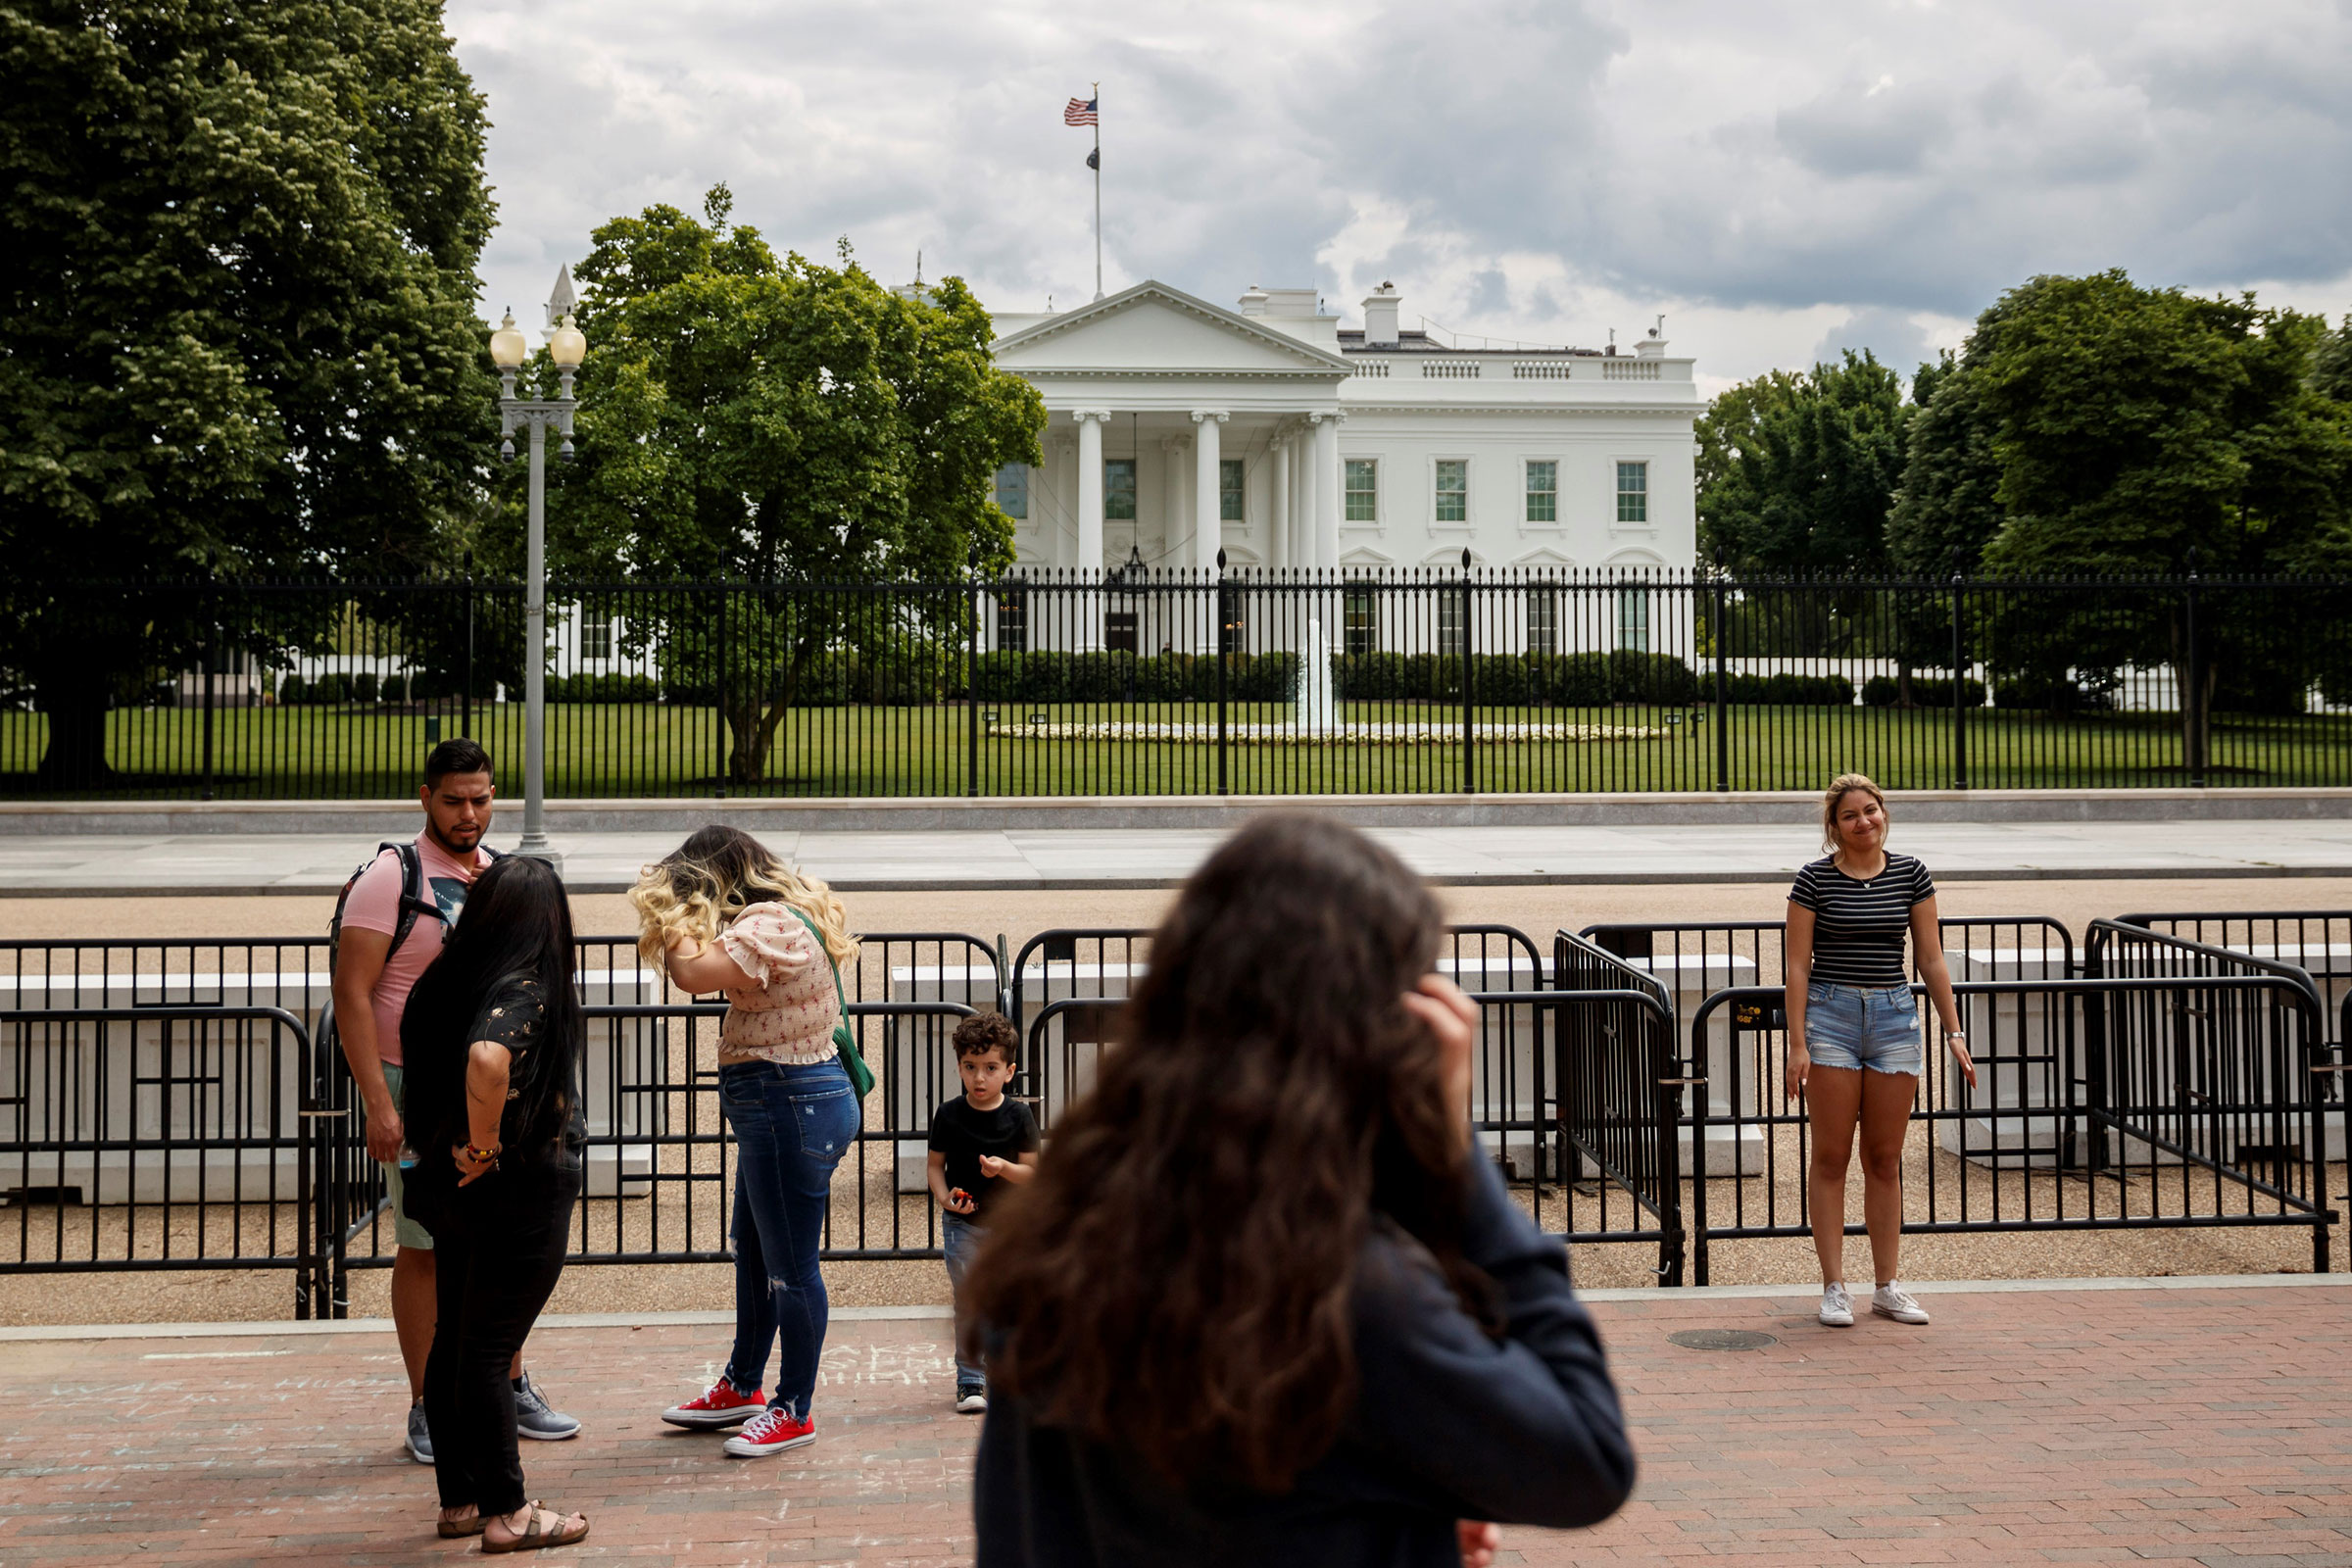 People are seen near the White House in Washington, on May 17, 2021. (Ting Shen—Xinhua/Getty Images)